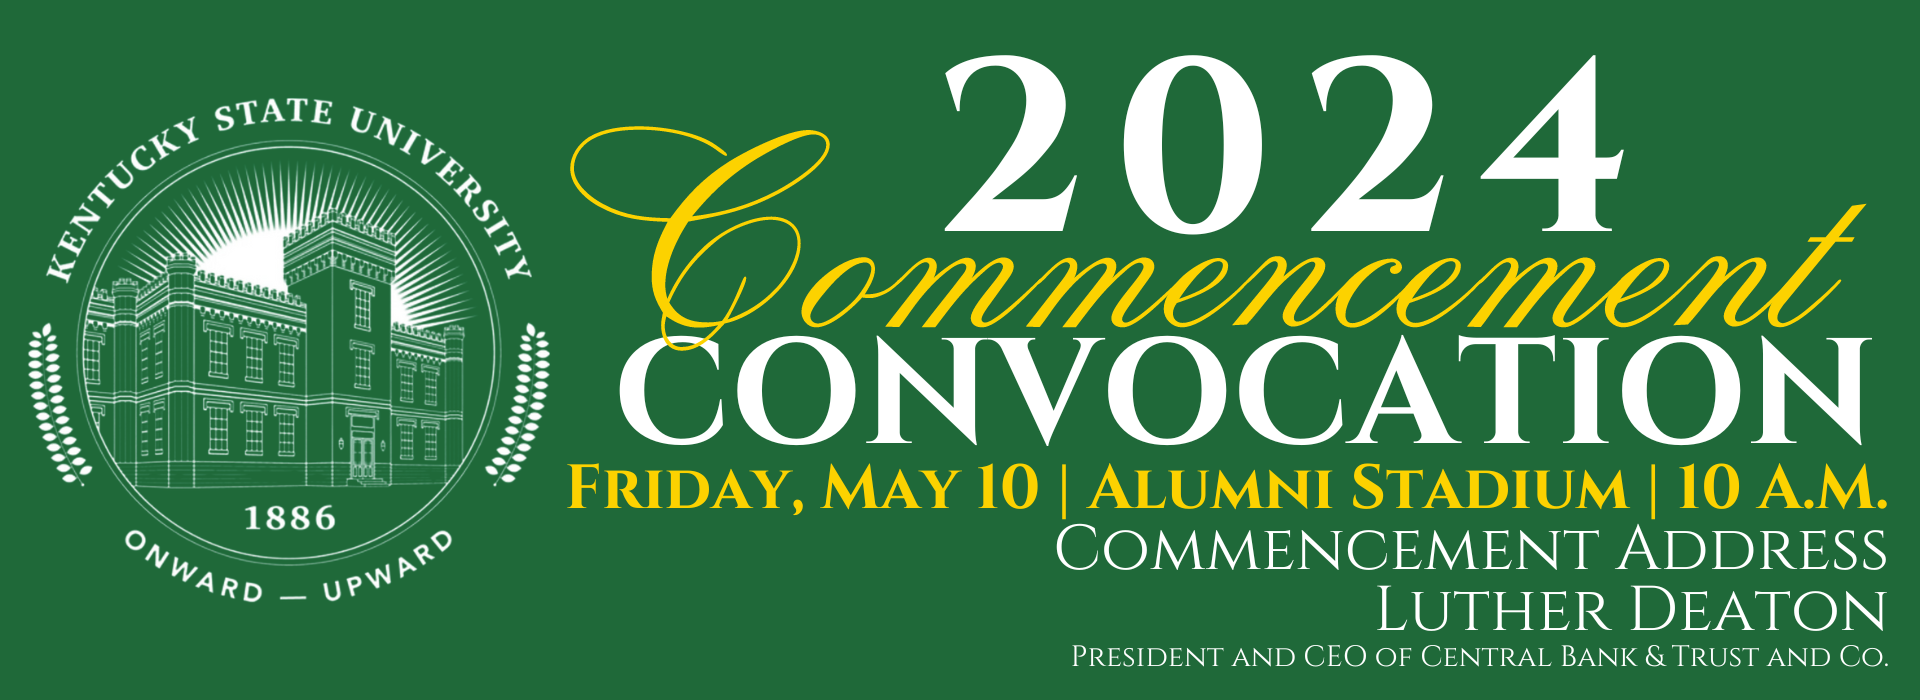 2024 Commencement Convocation Graphic - Friday, May 10; 10 am at Alumni Stadium